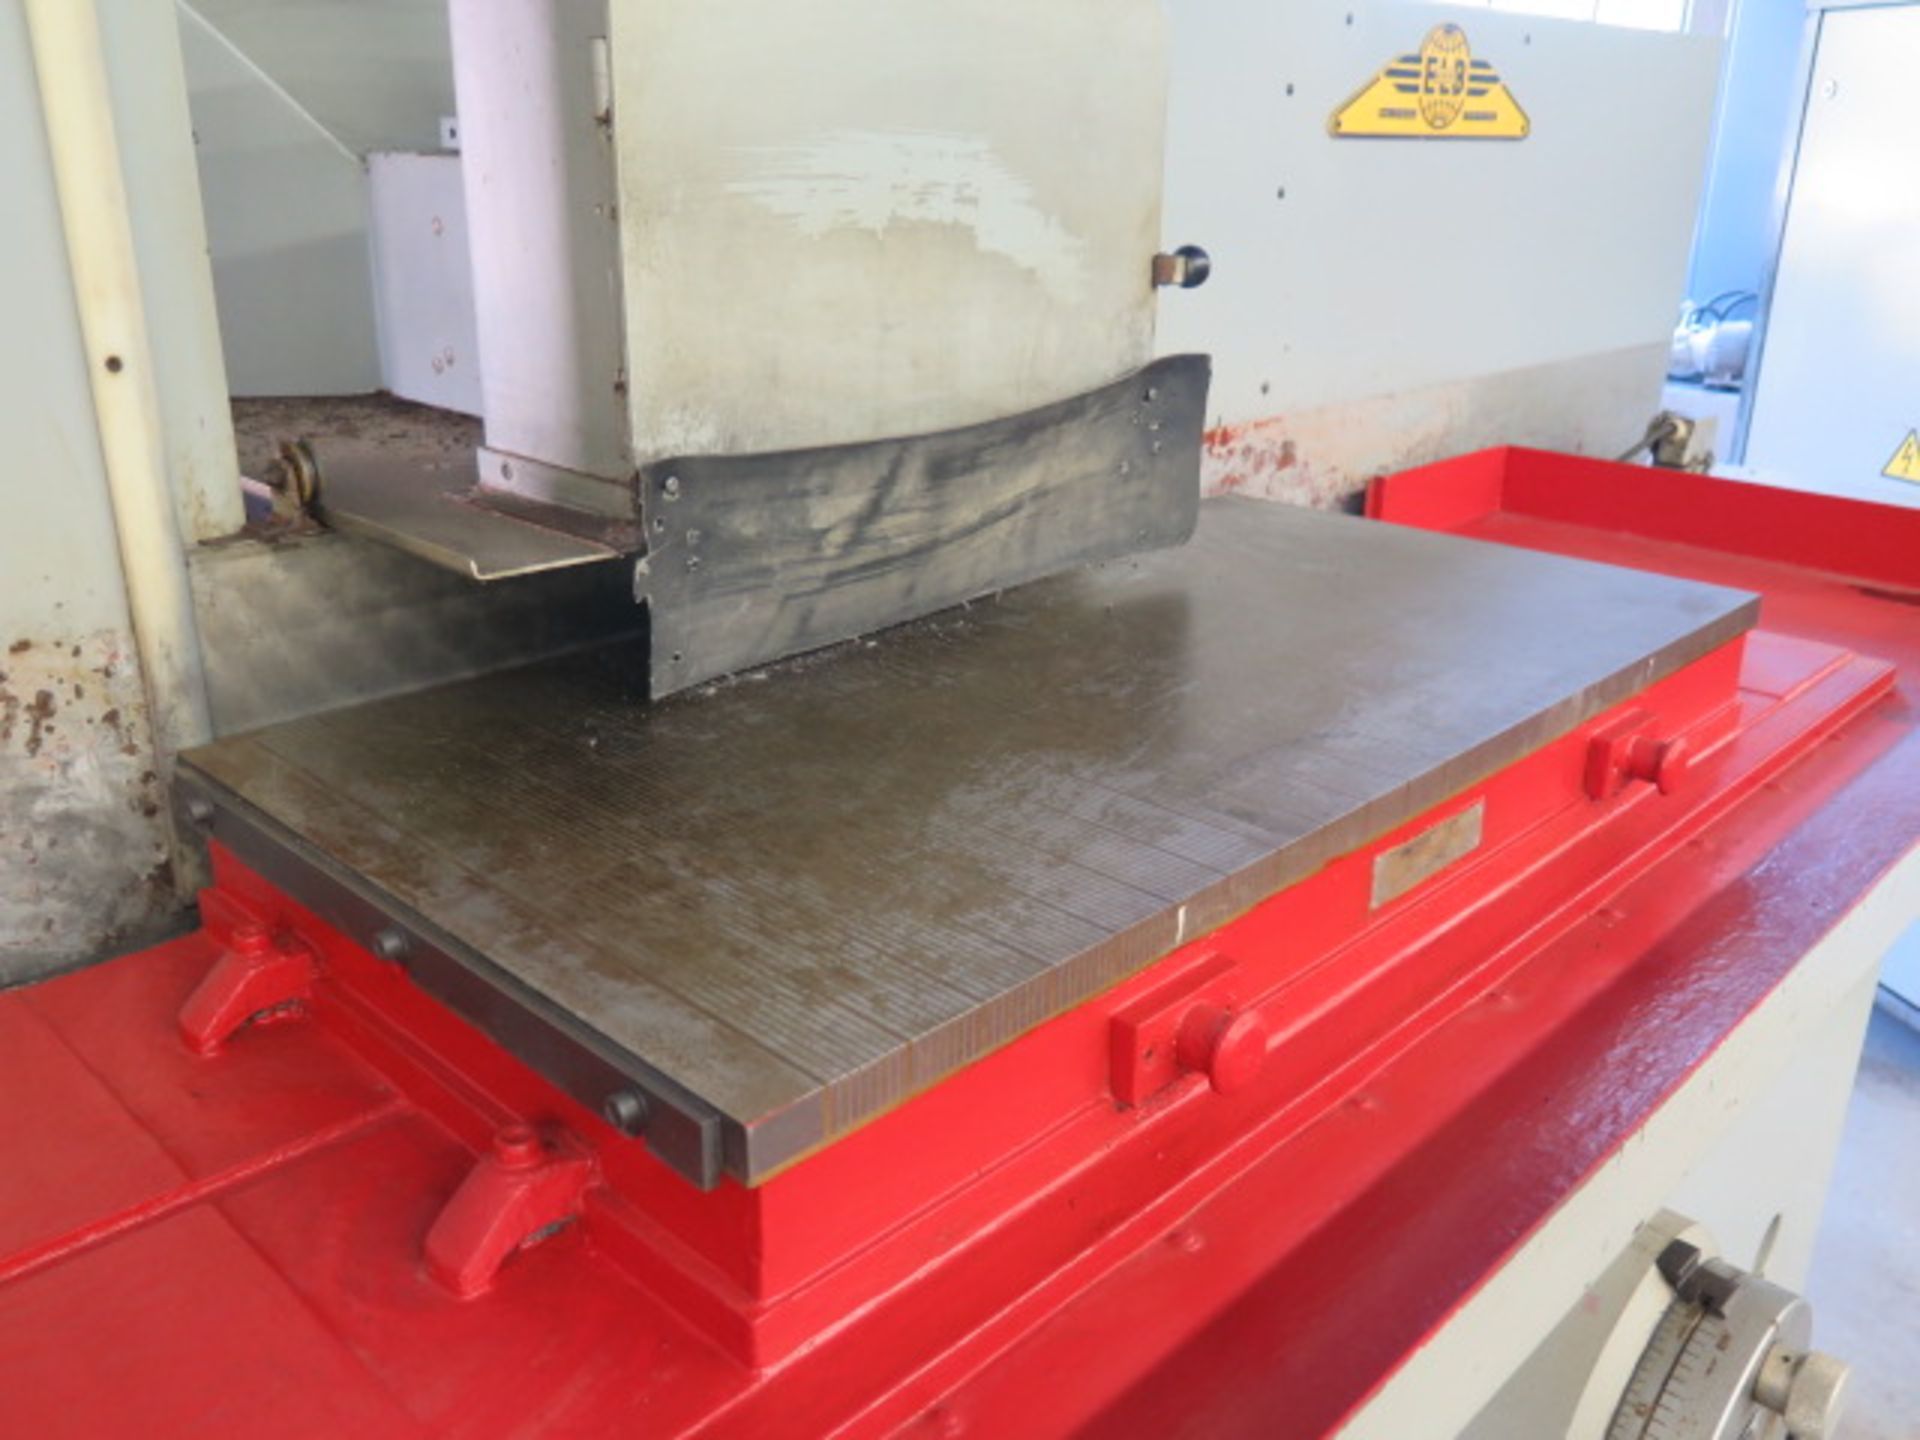 ELB SWBE 010 NPC-K NC 20” x 40” NC Surface Grinder s/n 209030489 w/ ELB Controls, SOLD AS IS - Image 11 of 15